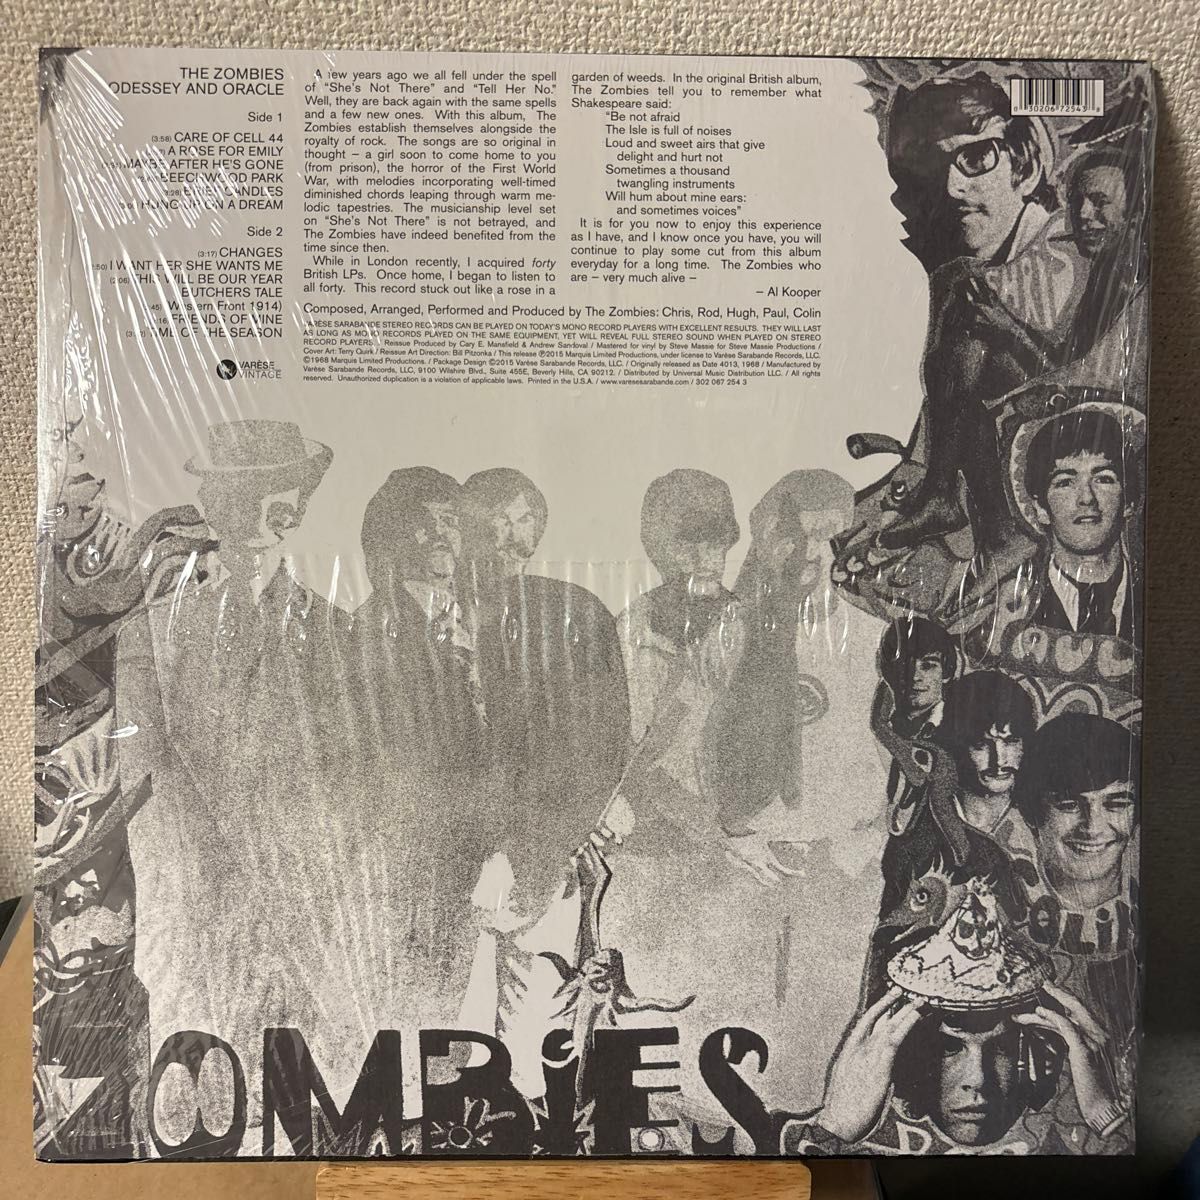 The Zombies Odessey & Oracle レコード LP ゾンビーズ and オデッセイ・アンド・オラクル